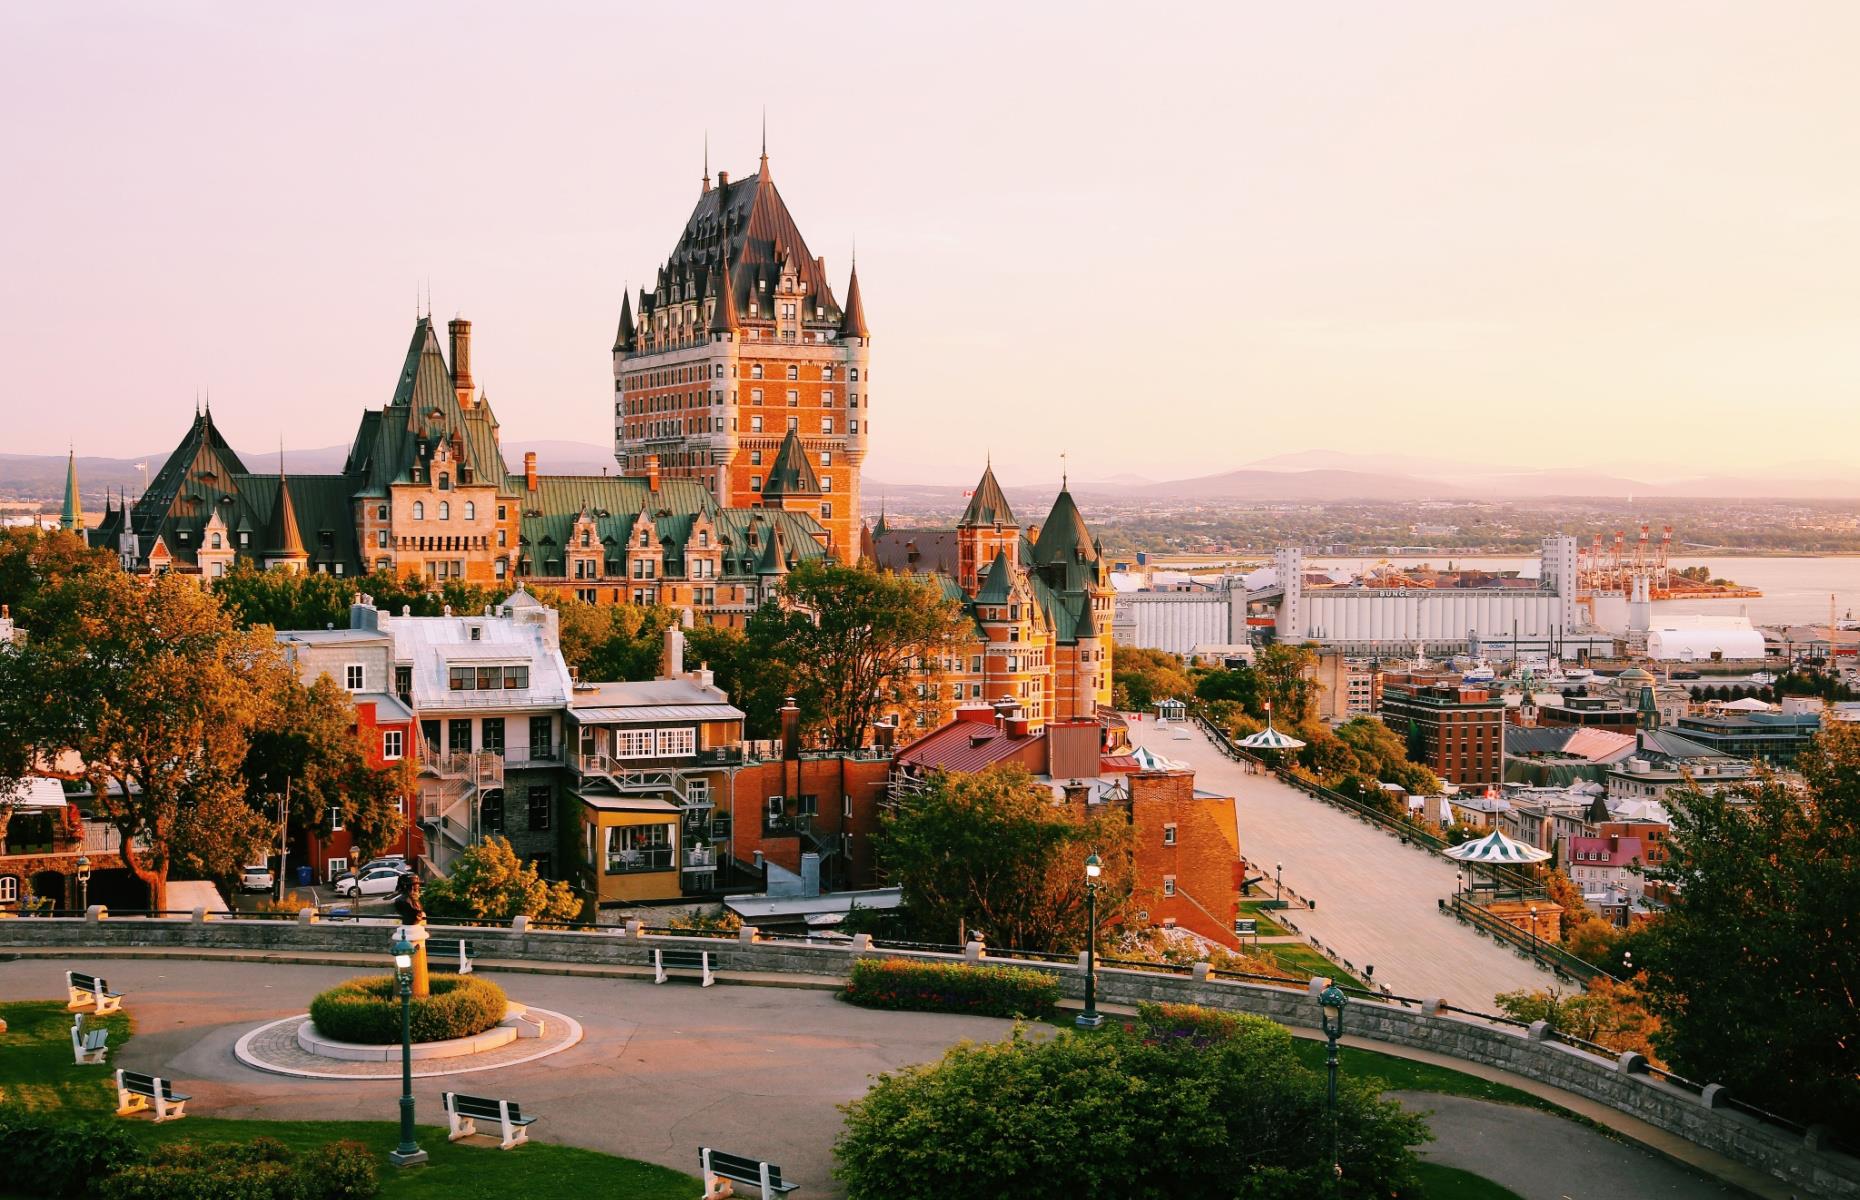 <p>No city in Canada is more postcard-worthy than <a href="https://www.loveexploring.com/guides/143612/quebec-canada-top-things-to-do-where-to-stay-and-what-to-eat">Québec</a> – particularly its Old Town, which could pass as a fairy-tale European village. The only surviving fortified city in Canada and the United States, there's a beautiful church, monument or crumbling section of wall around every corner. This history, plus bucket-list sites like the <a href="https://www.ville.quebec.qc.ca/en/citoyens/patrimoine/quartiers/saint_jean_baptiste/interet/plaines_abraham_creer_parc_public.aspx">Plains of Abraham</a> and the <a href="https://www.fairmont.com/frontenac-quebec/">Chateau Frontenac</a> hotel, form a big part of Québec’s appeal, along with its prime position on the mighty St Lawrence River.</p>